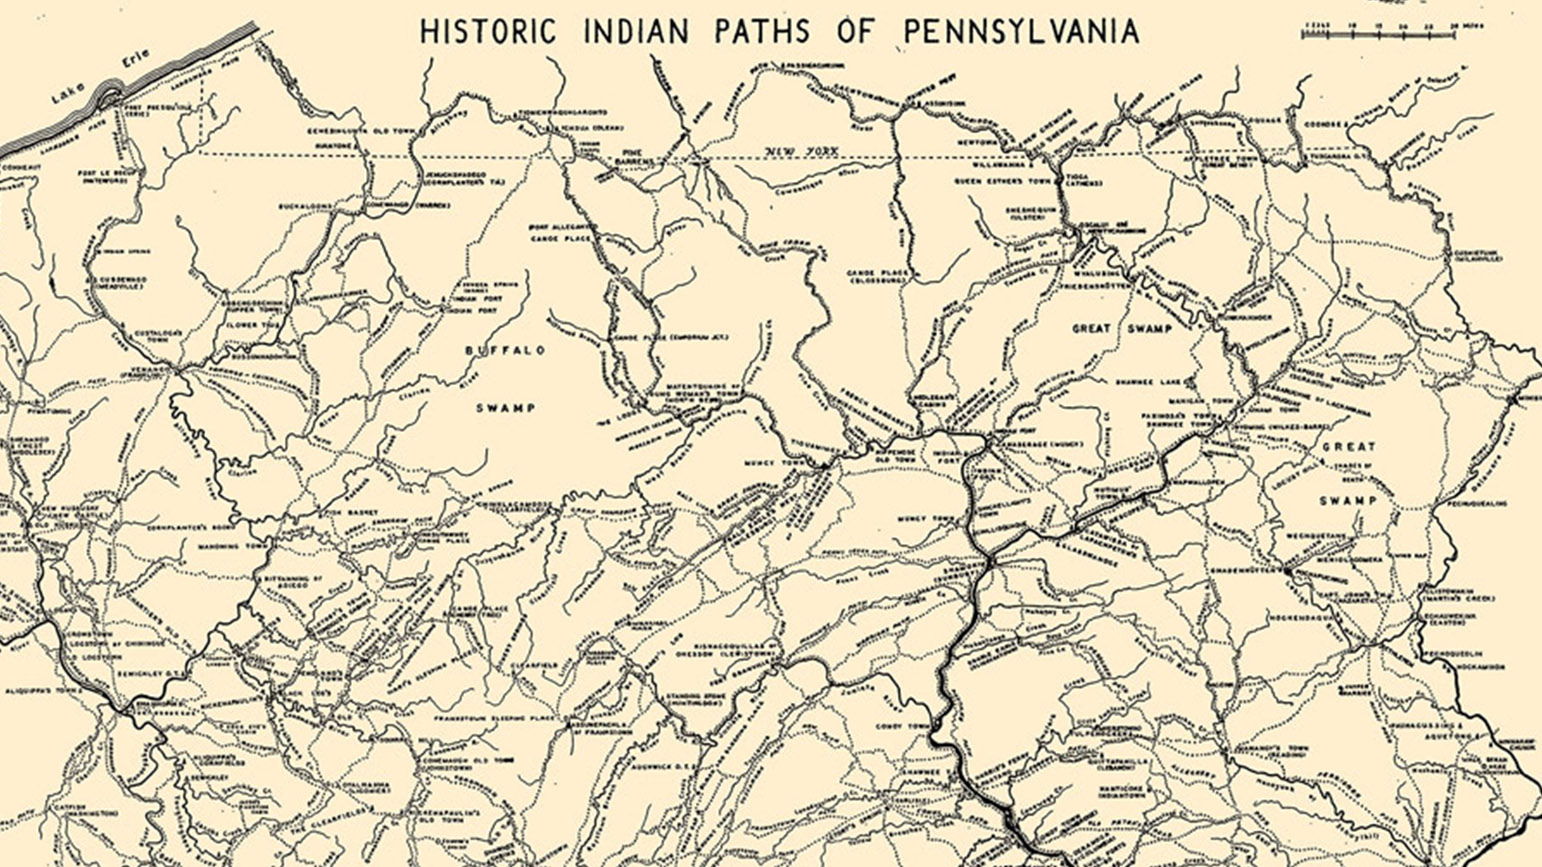 Map labeled Historic Indian Paths of Pennsylvania